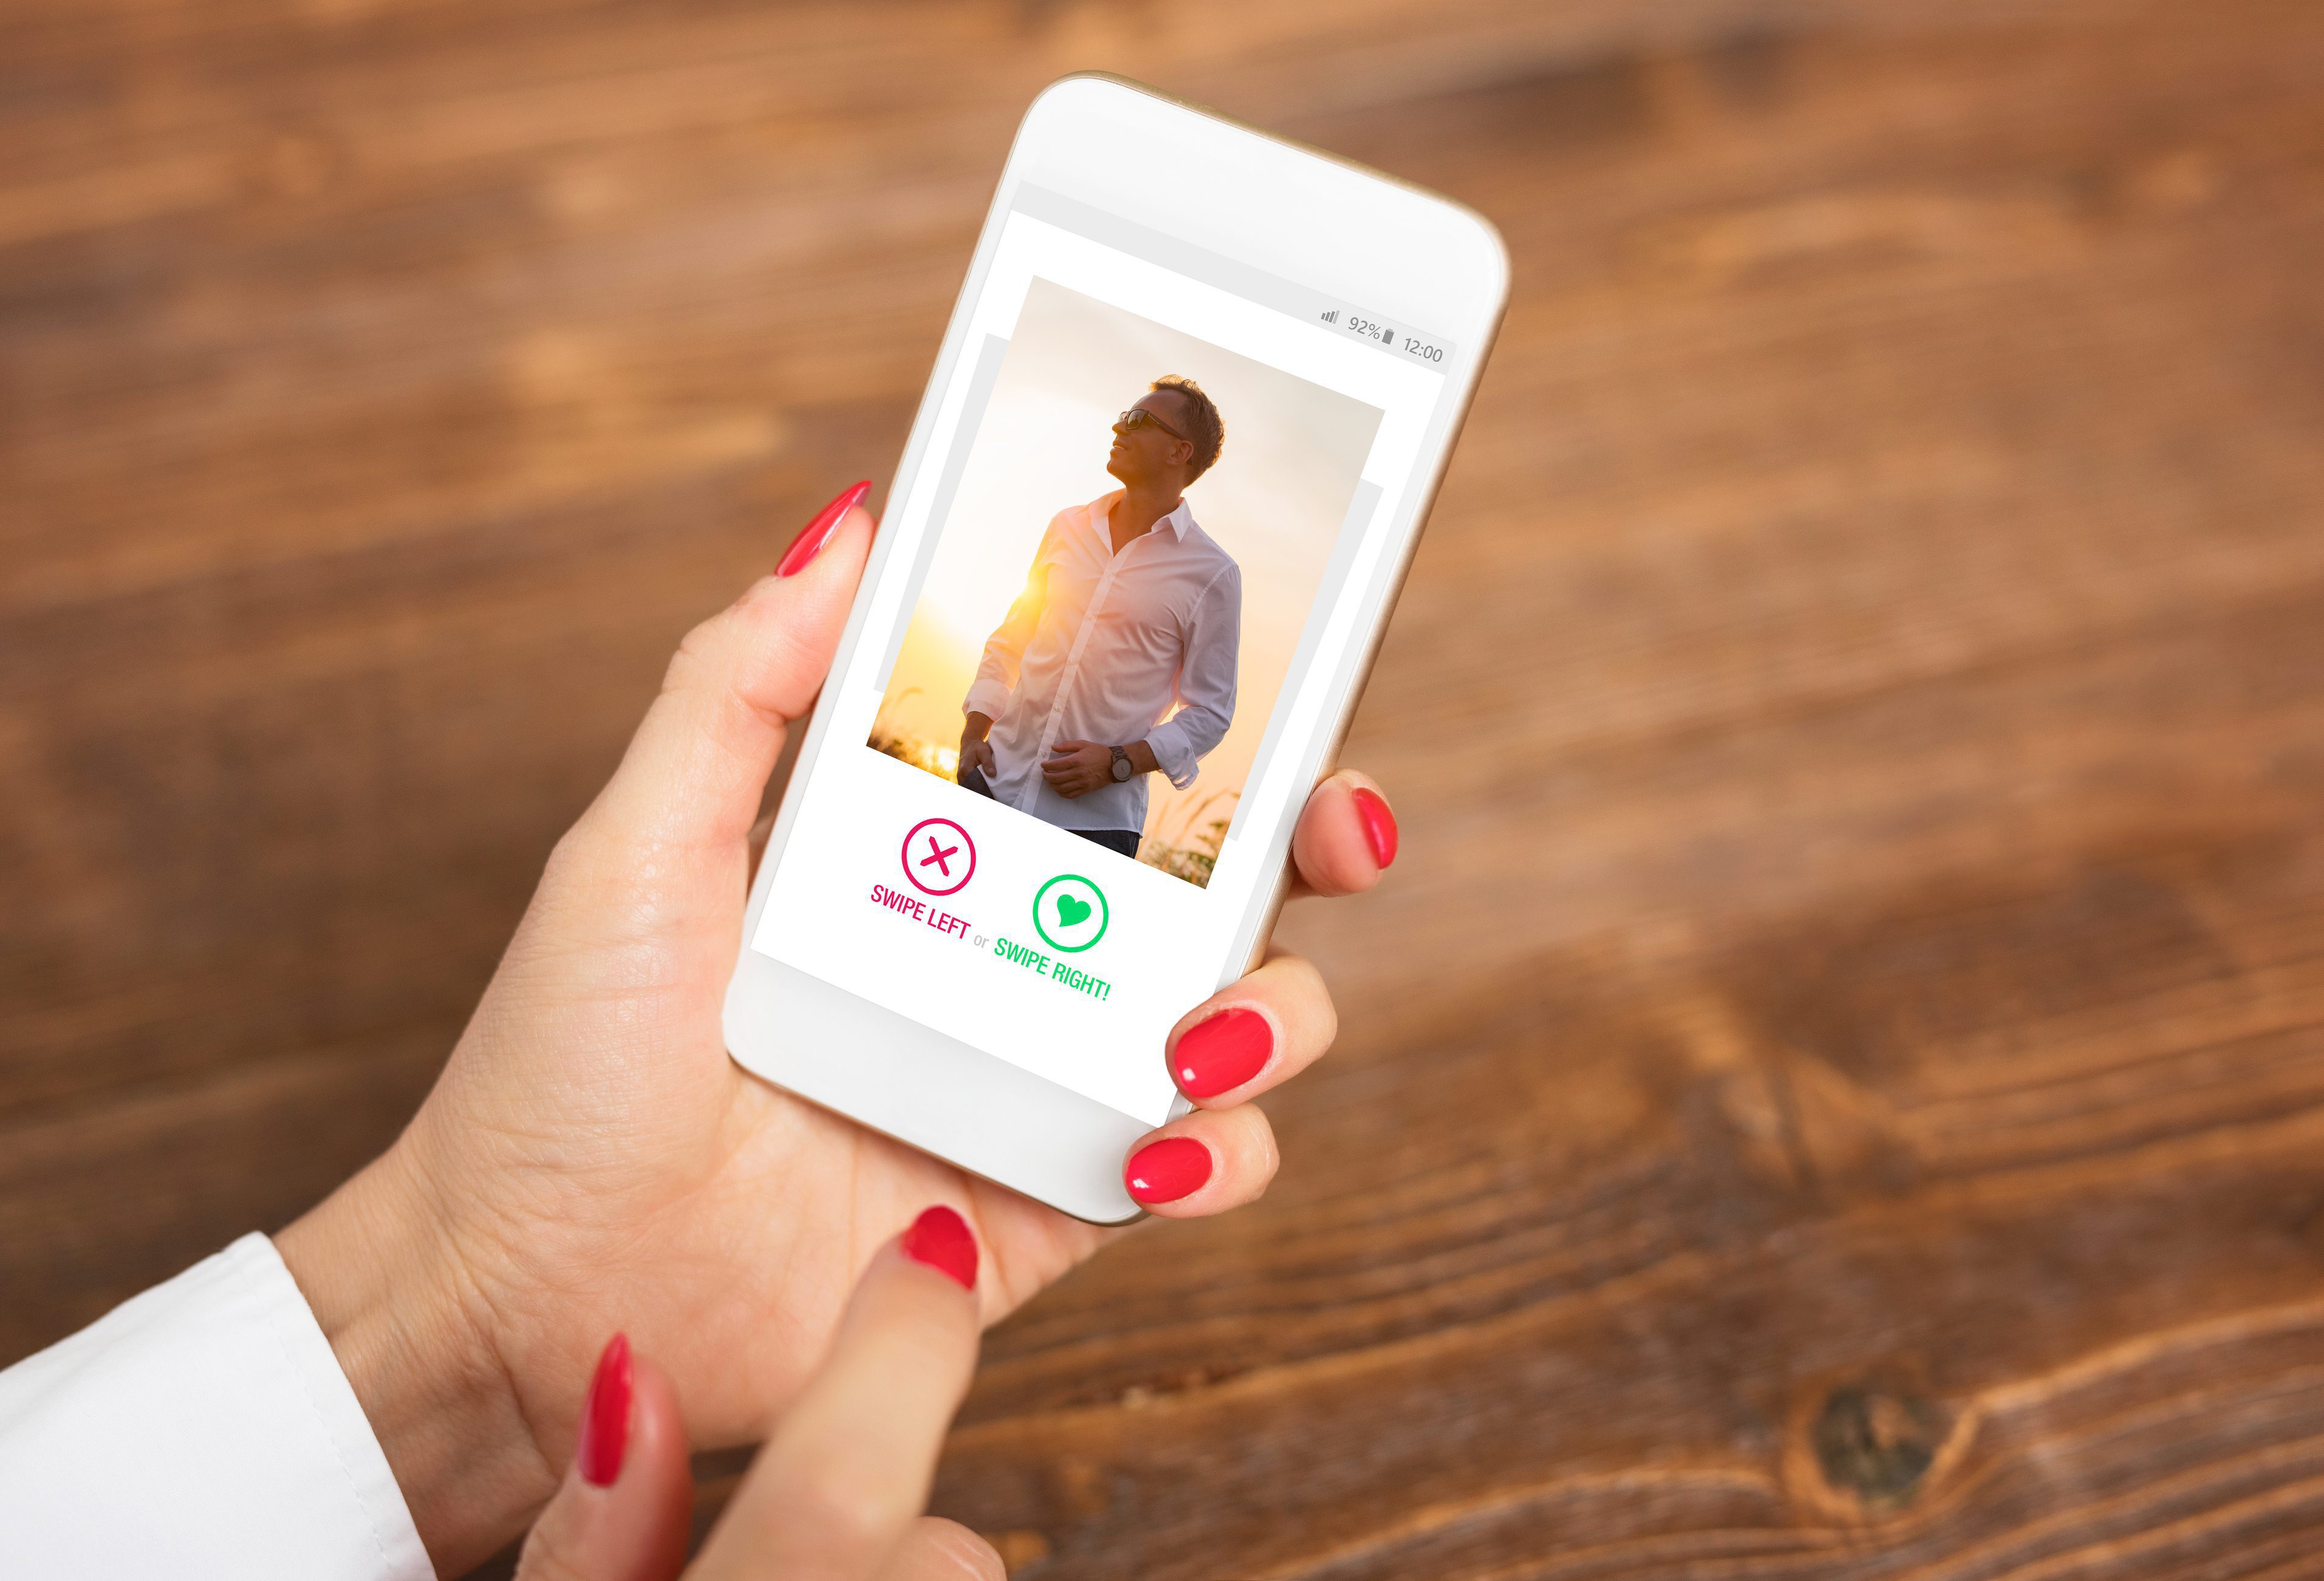 Online Dating: Do I Owe A Match An Explanation For Unmatching?